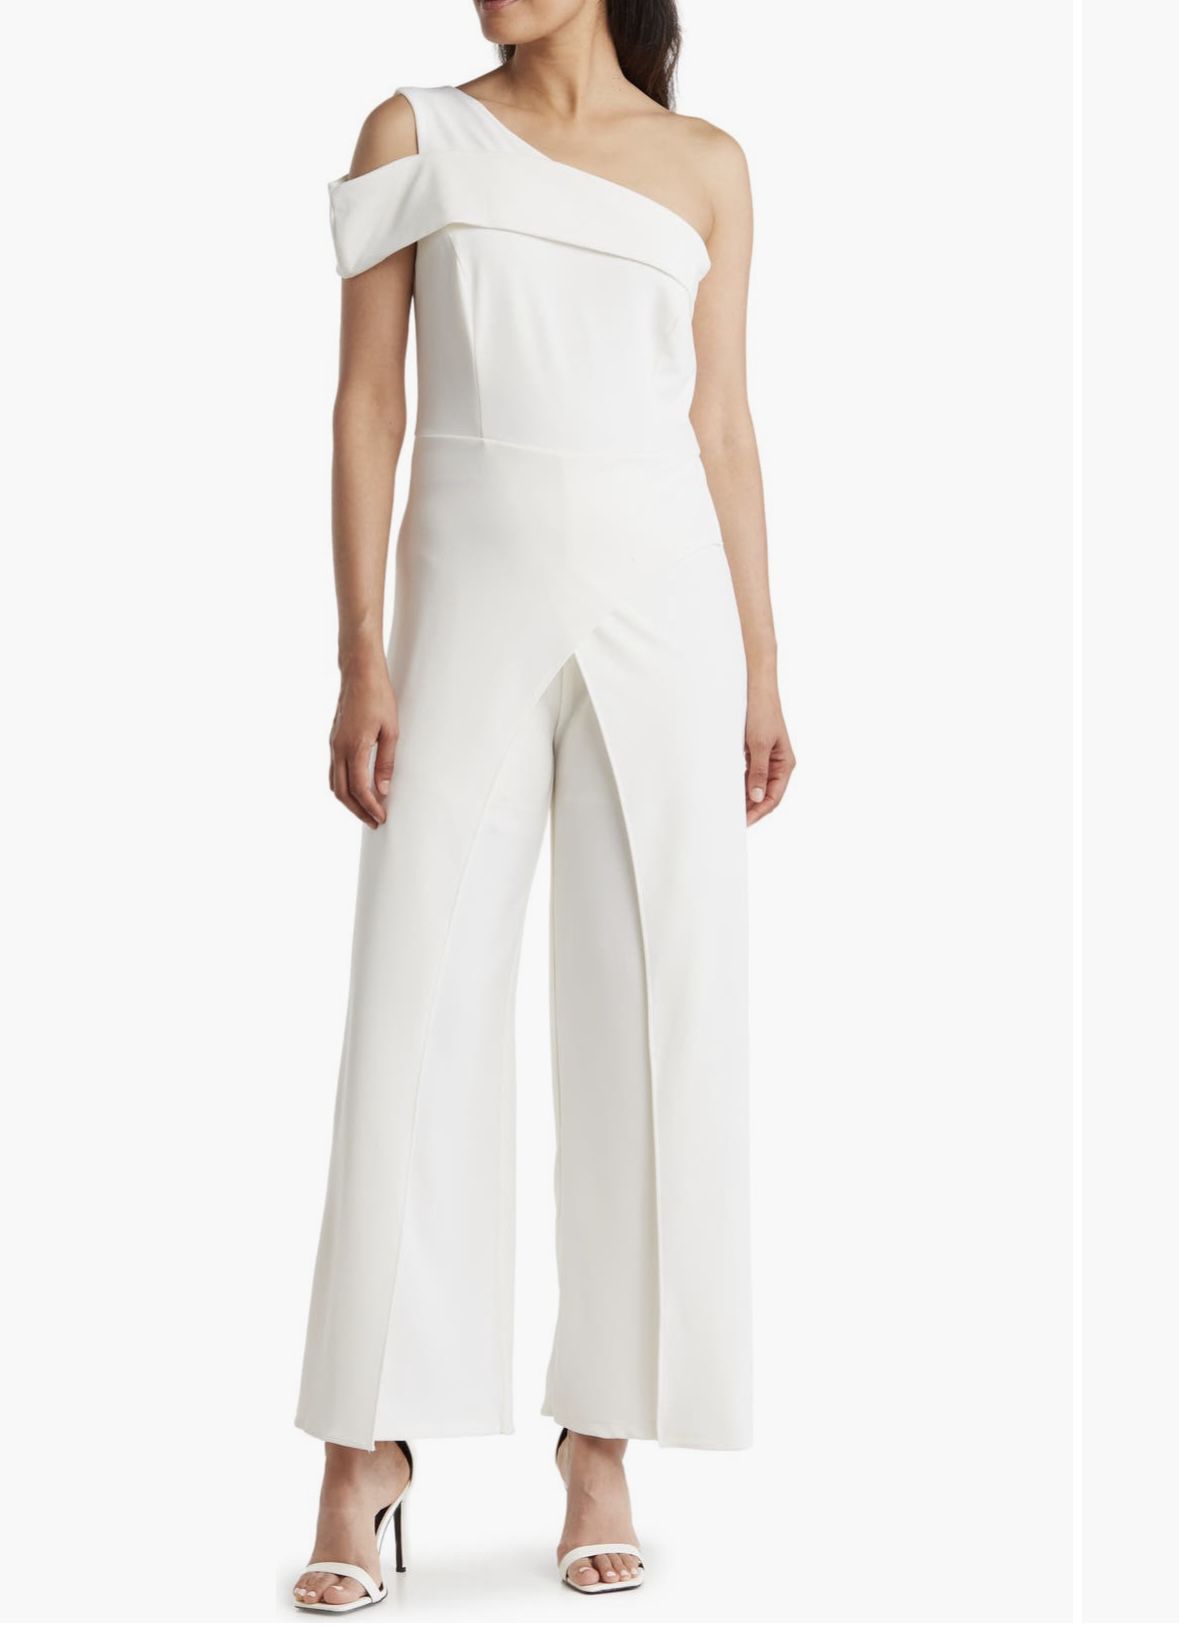  MAKE ME AN OFFER! NEW! MARINA IVORY JUMPSUIT-ONE SHOULDER ASYMMETRIC-Size 12- with tags